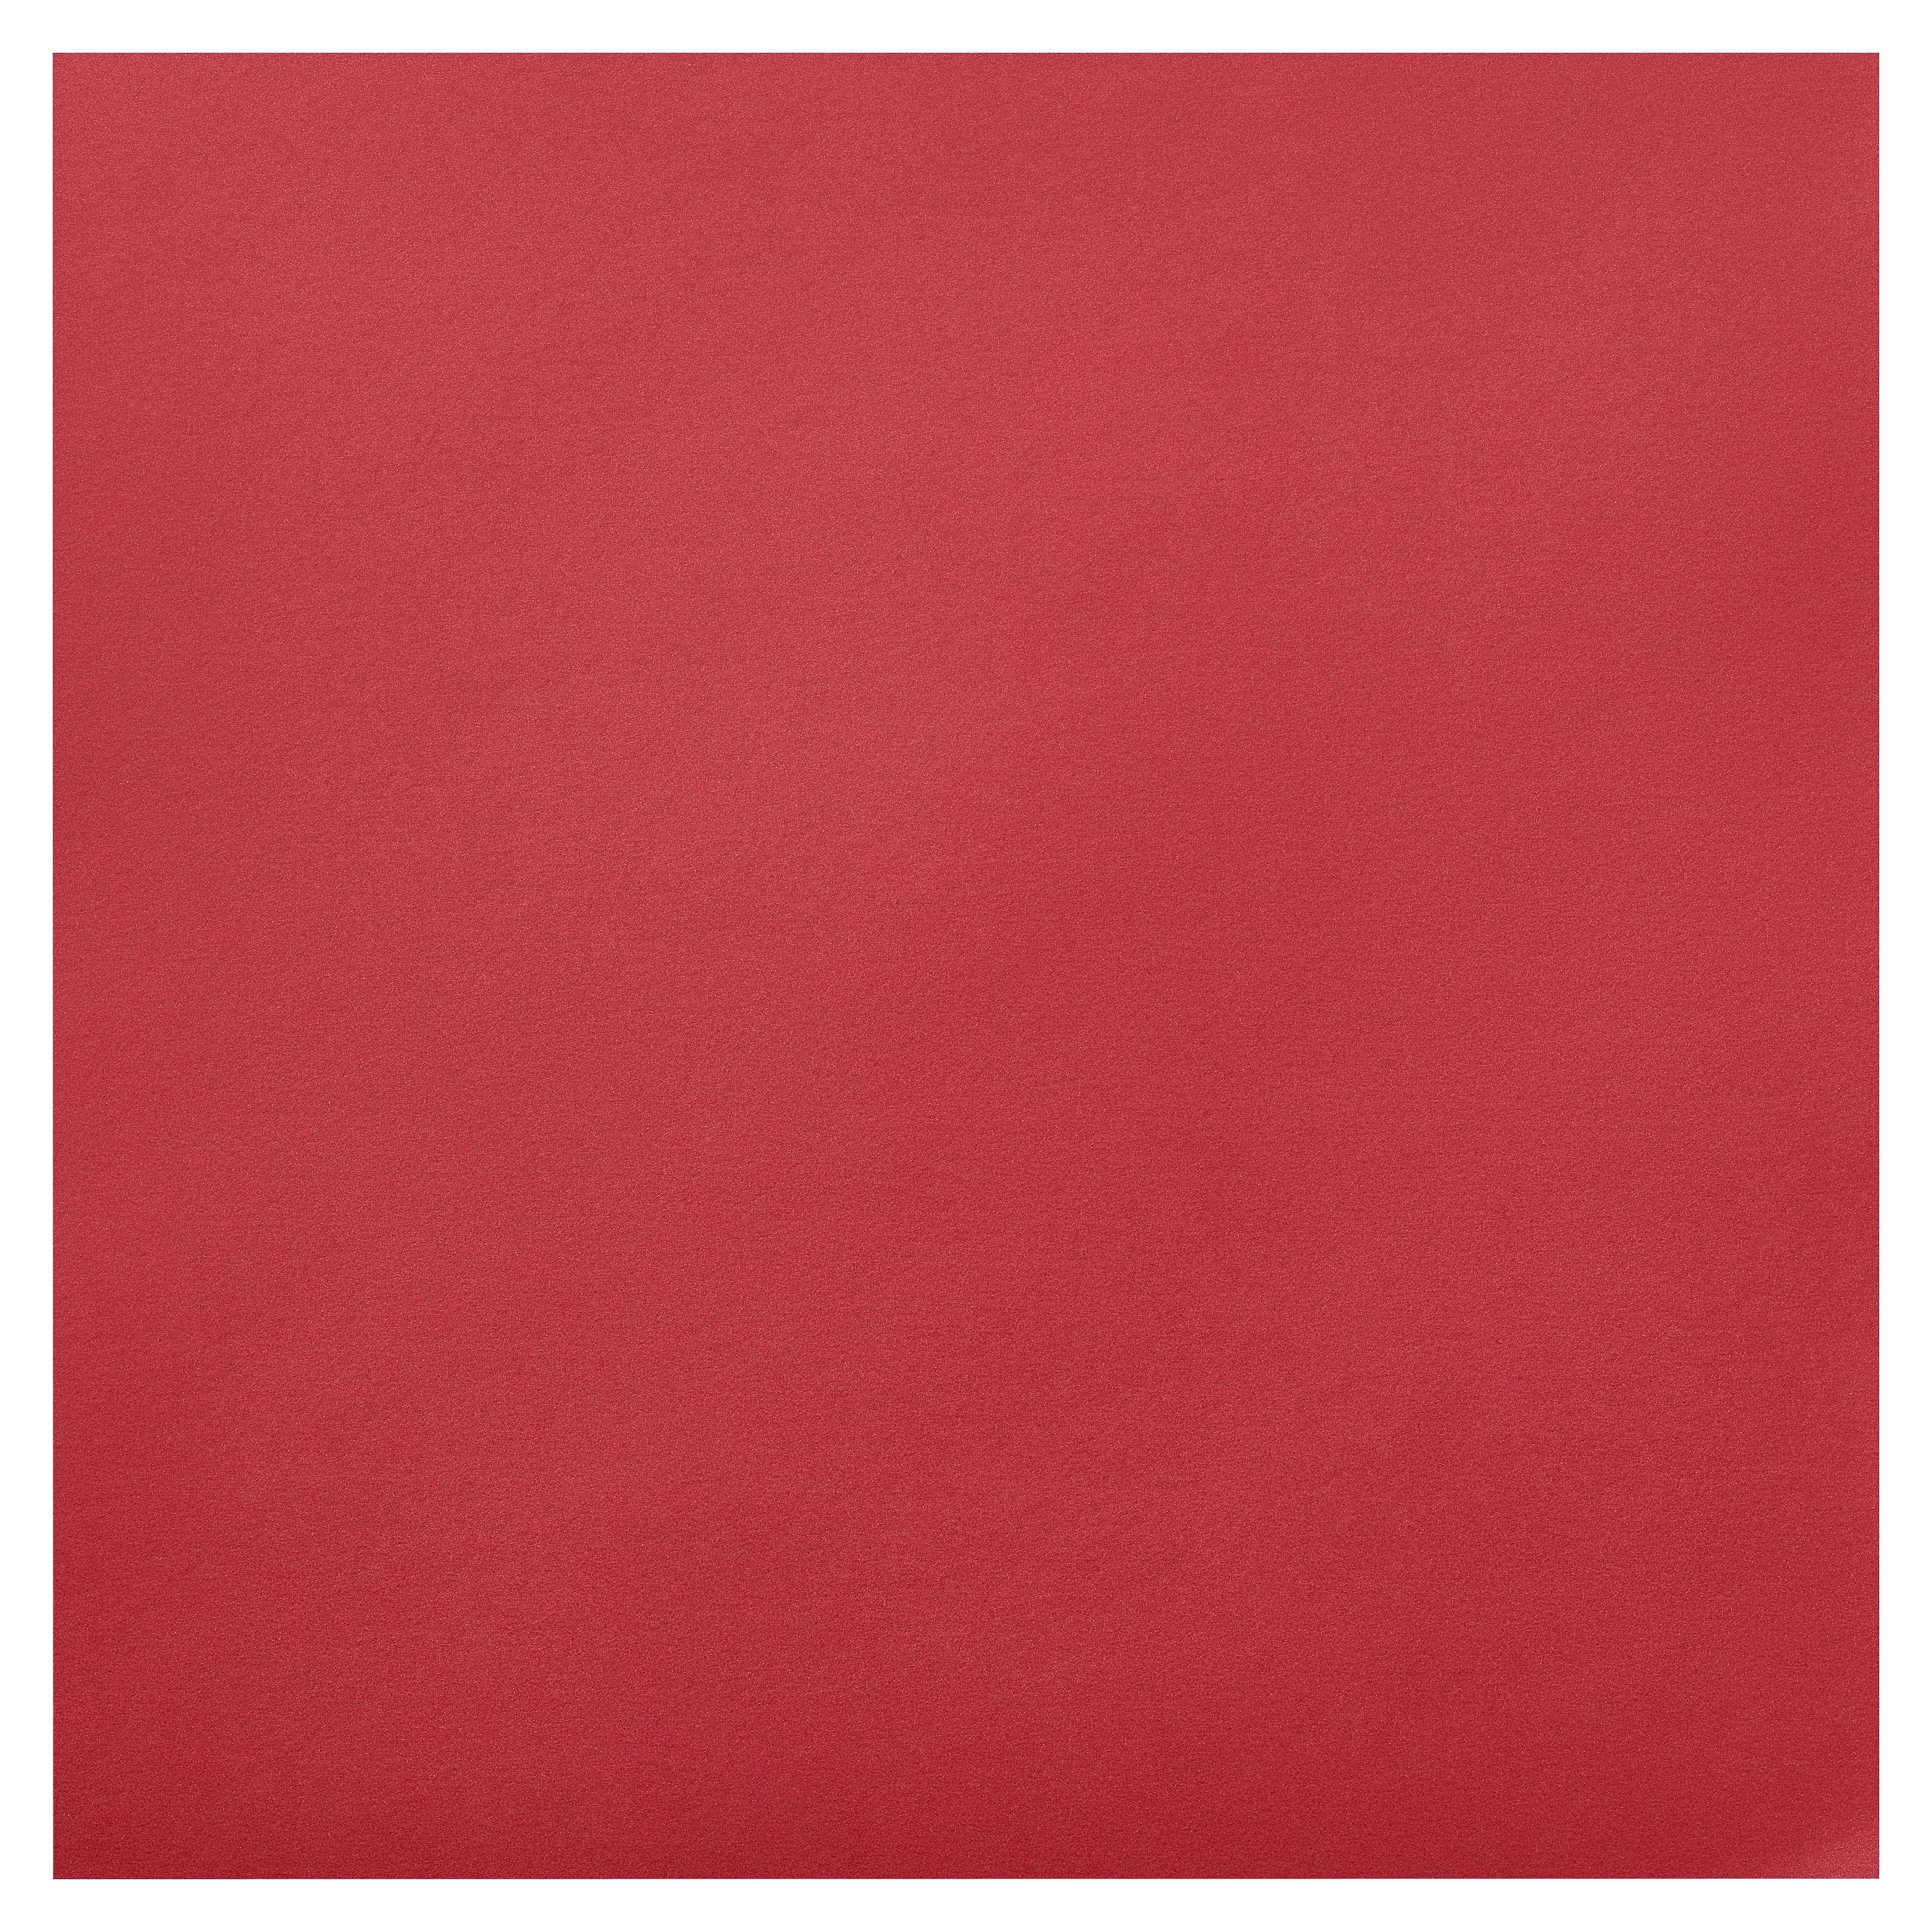 Bright Red Starry Cardstock Paper by Recollections®, 12 x 12